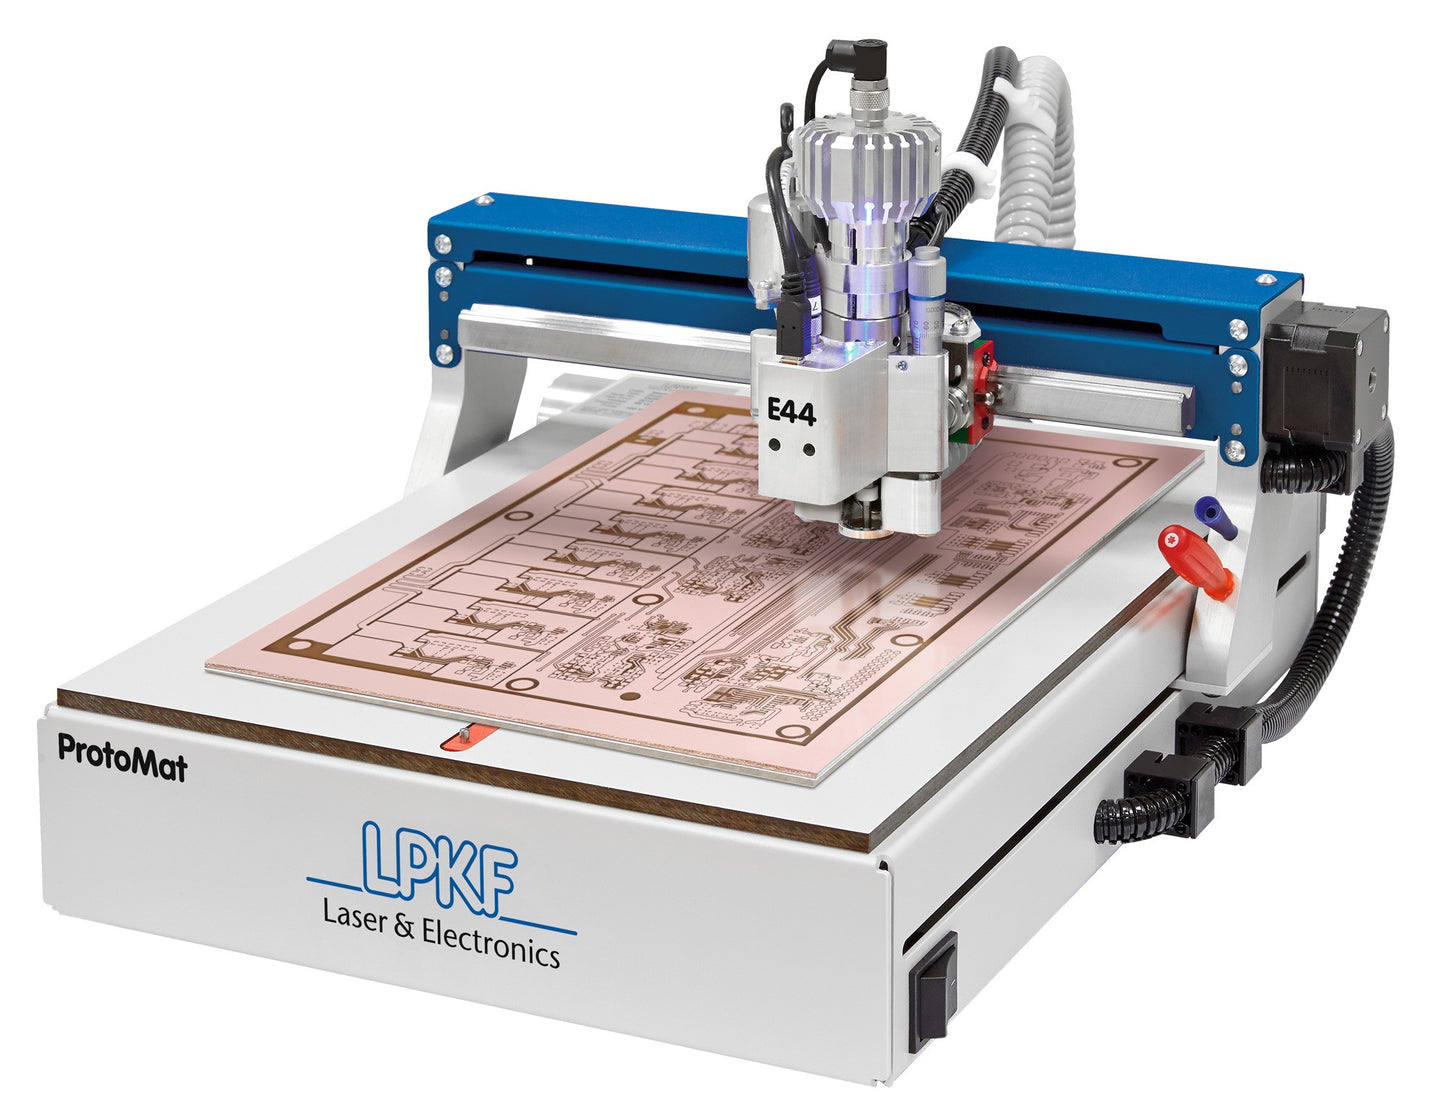 LPKF Protomat E44 PCB Prototyping Machine - Single and double sided printed circuit boards, ideal for research and training